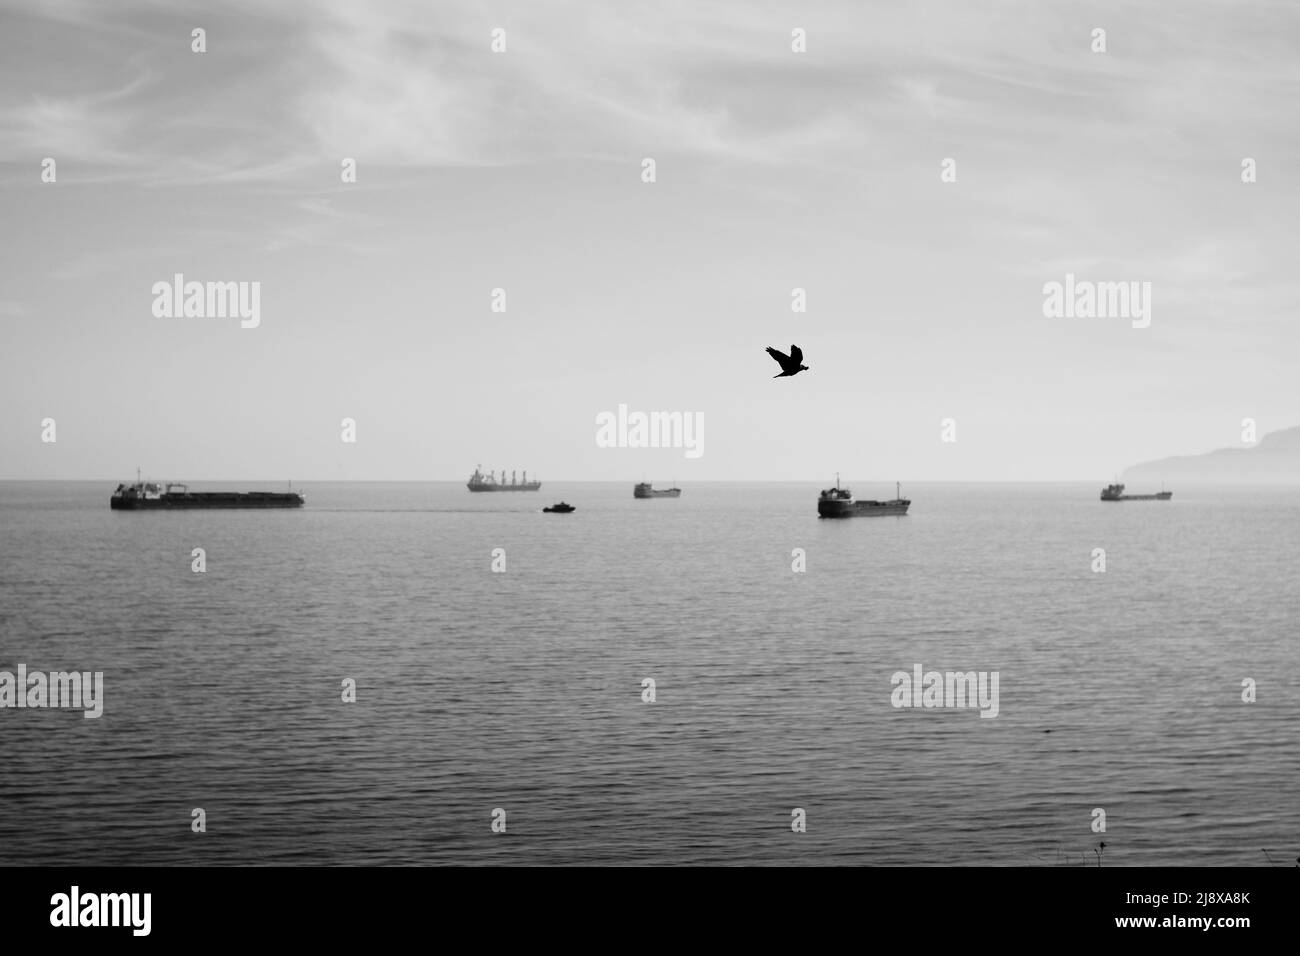 A monochrome photo of the cargo ships in the open sea Stock Photo